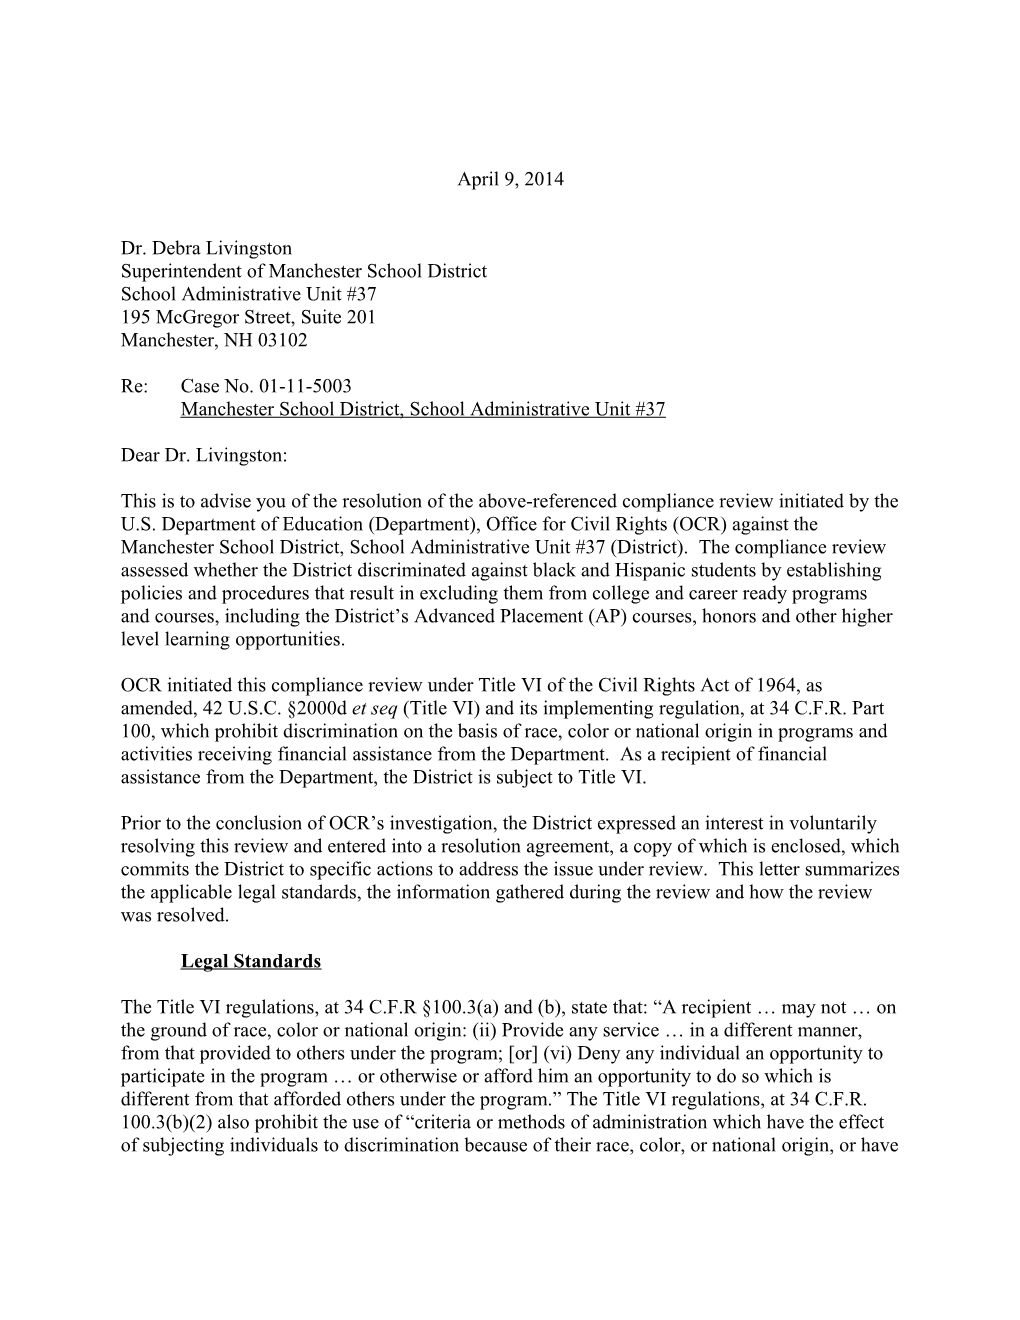 Resolution Letter: Manchester Public Schools, New Hampshire: Compliance Review #01-11-5003